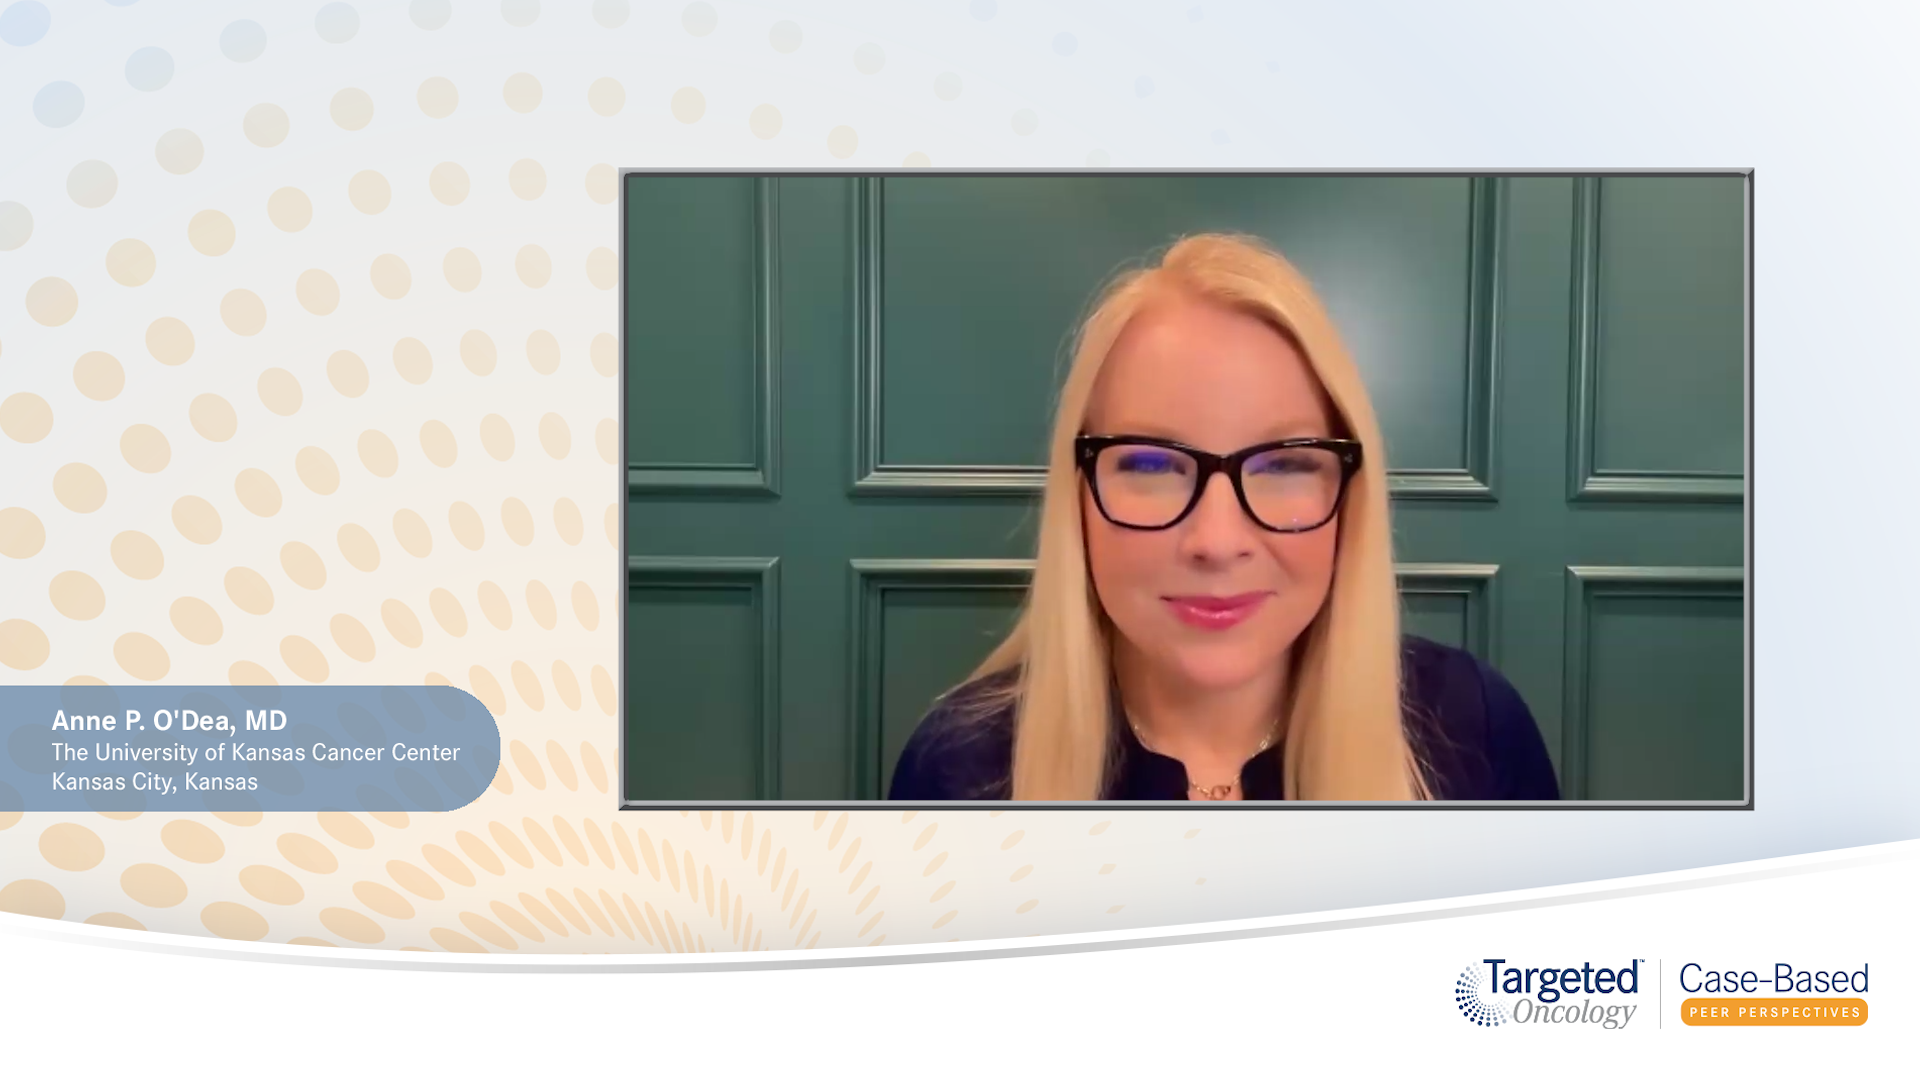 Video 5 - "Second-Line Treatment Considerations and Improving Outcomes in Breast Cancer"